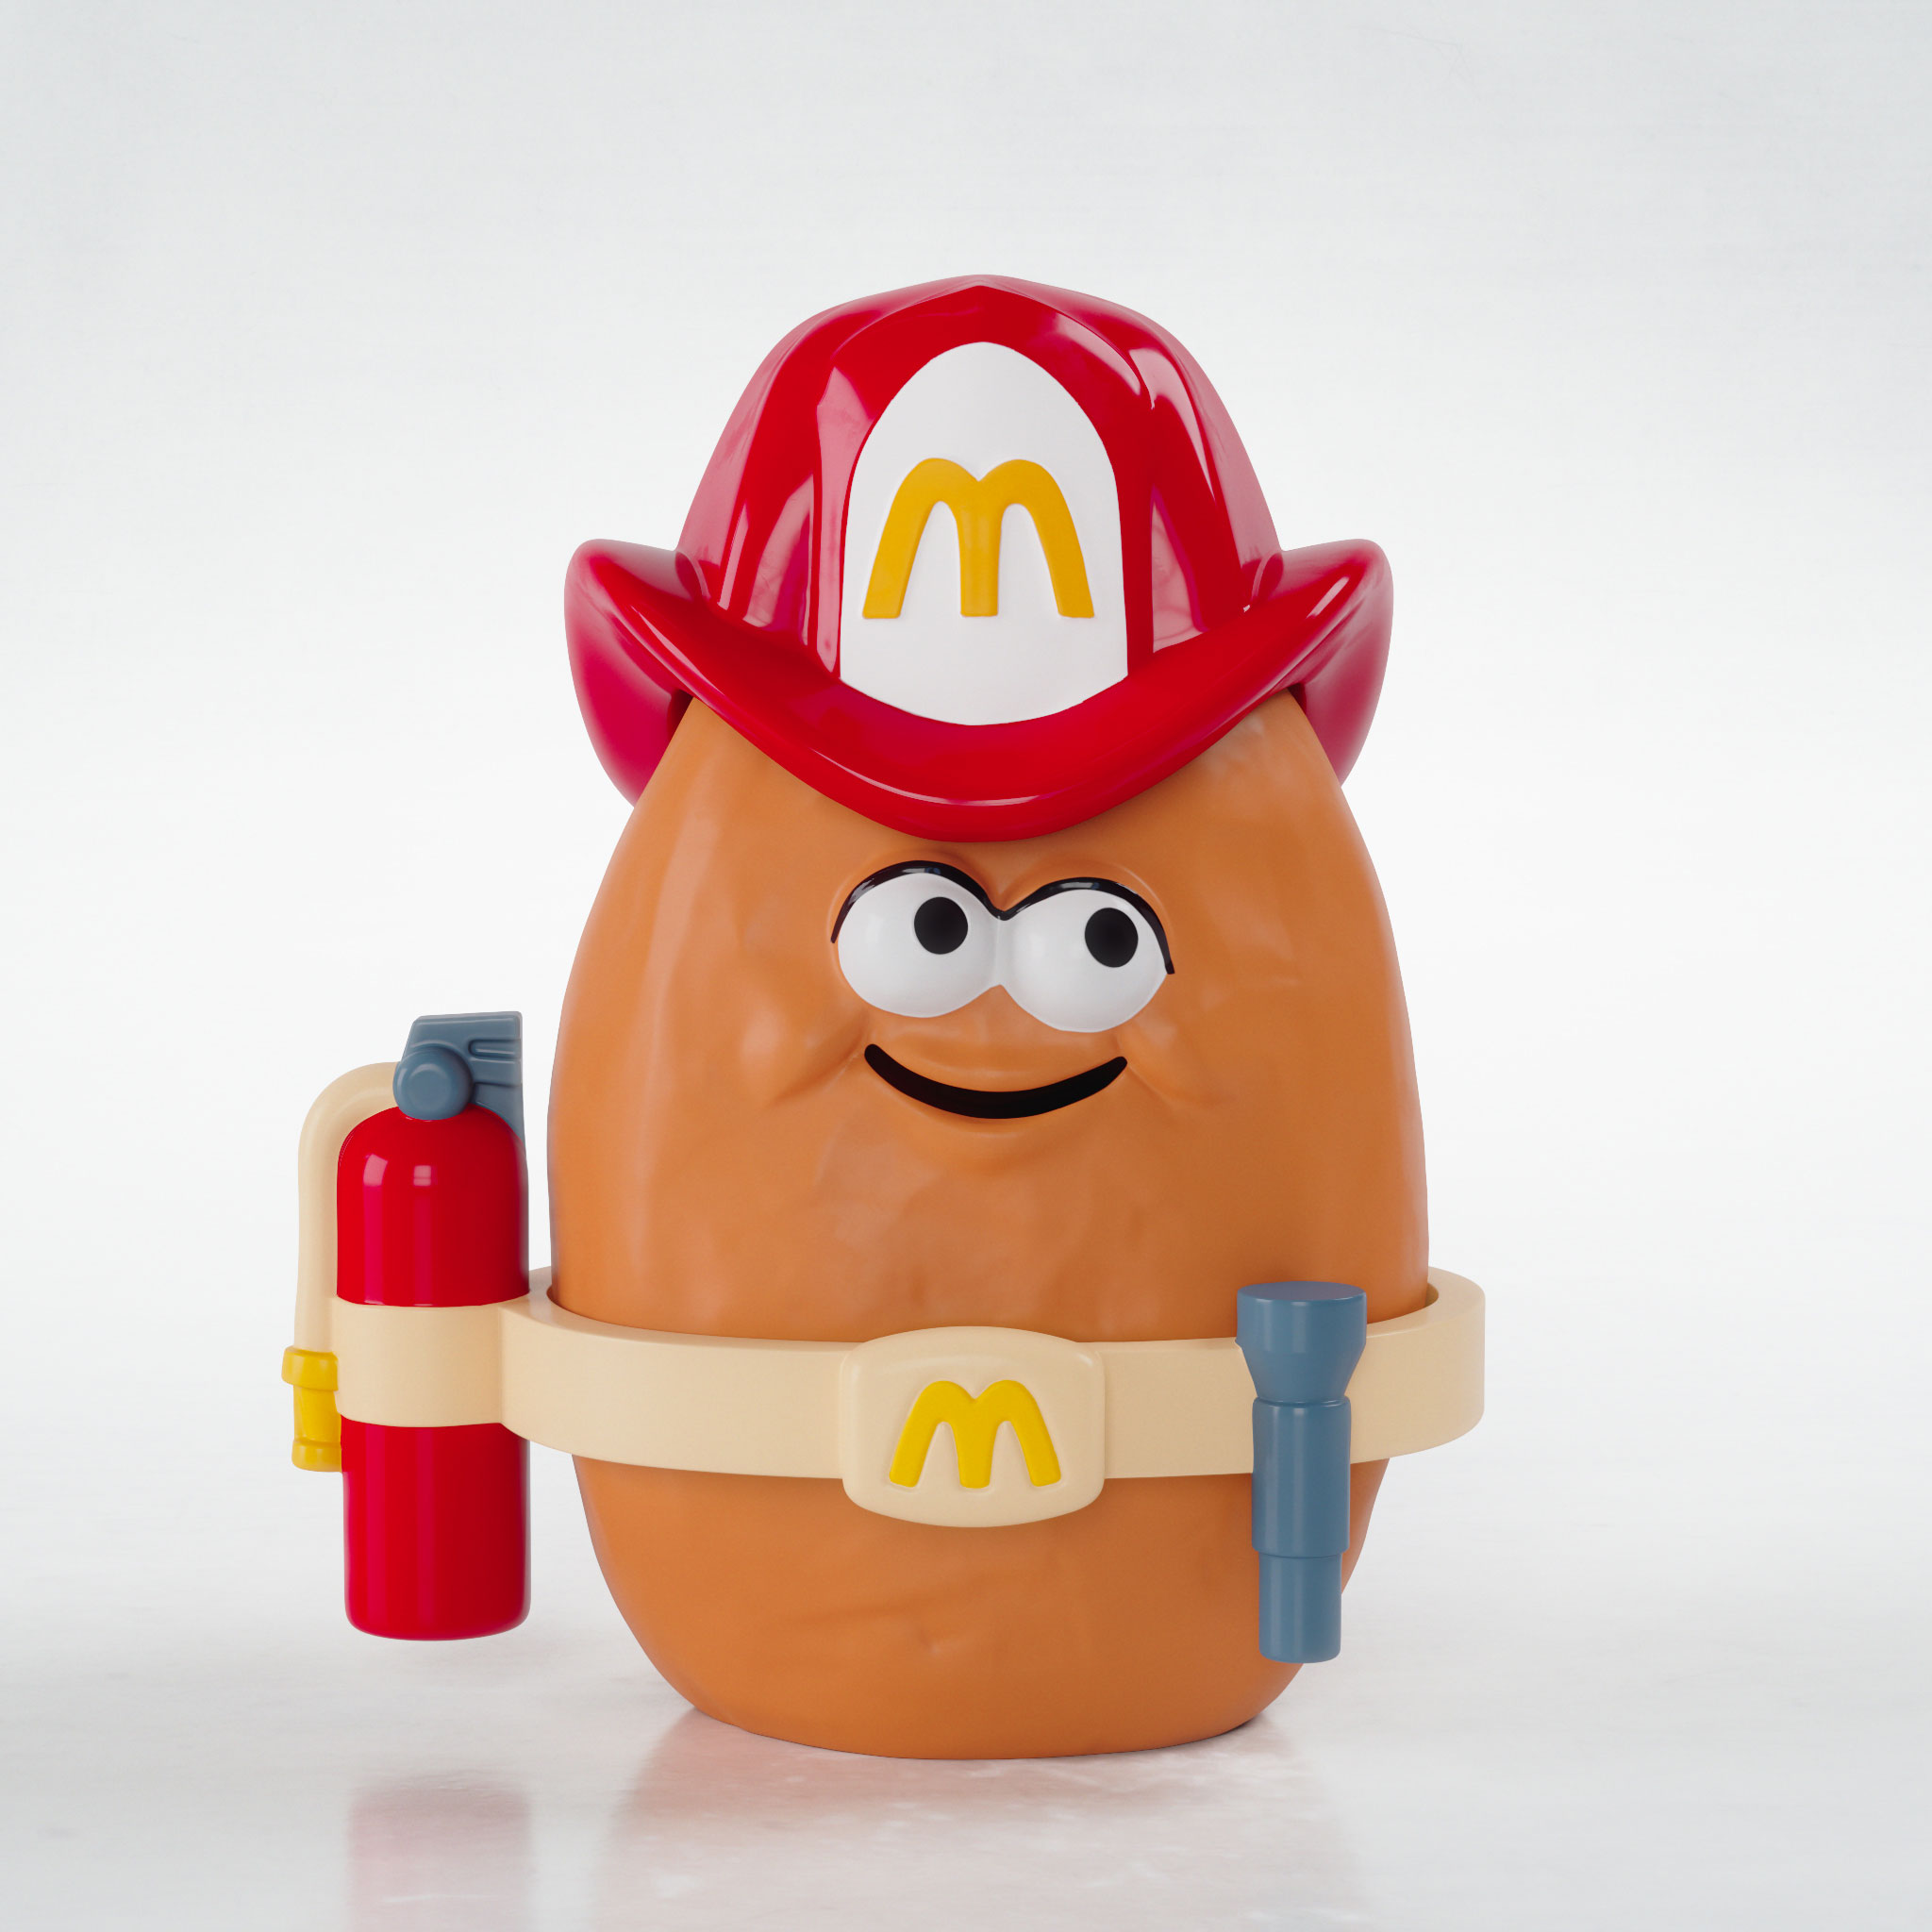 2019 McDonalds SURPRISE RETRO 40TH ANNIVERSARY Happy Meal Toys YOU PICK 1 OR SET 